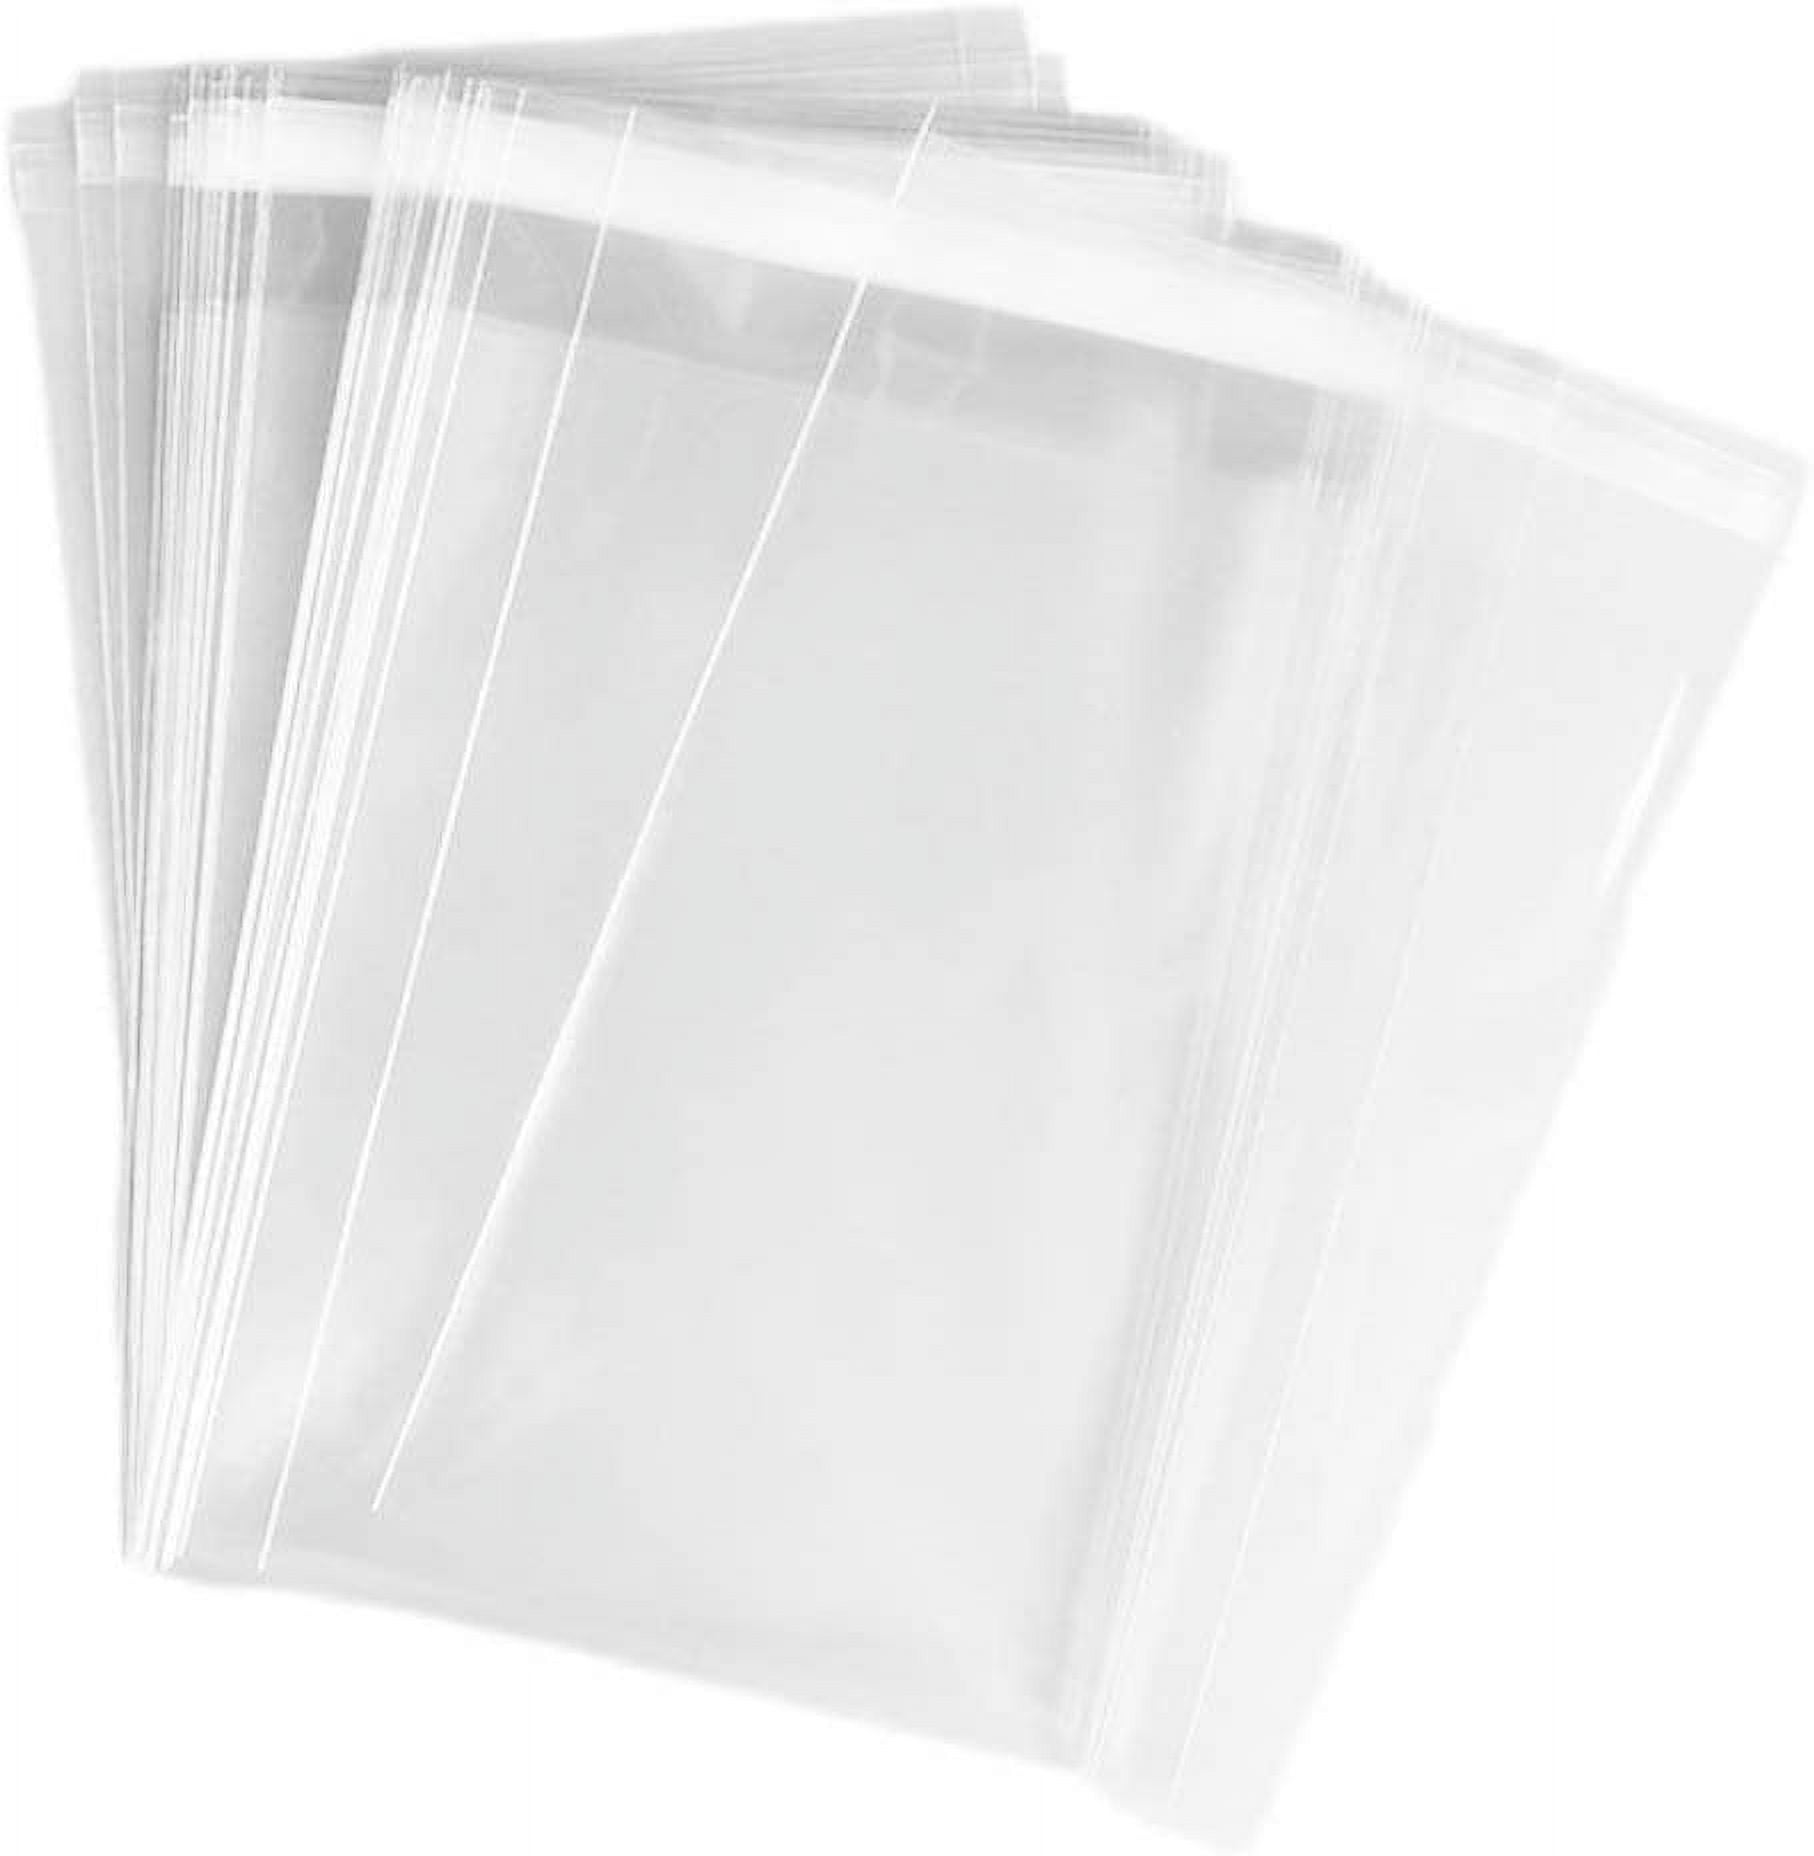 SHIPKEY 10 Pack 7.5”x2.8”x9.1” Small Clear Gift Bags, Transparent Gift Bags  with Handles, Waterproof…See more SHIPKEY 10 Pack 7.5”x2.8”x9.1” Small